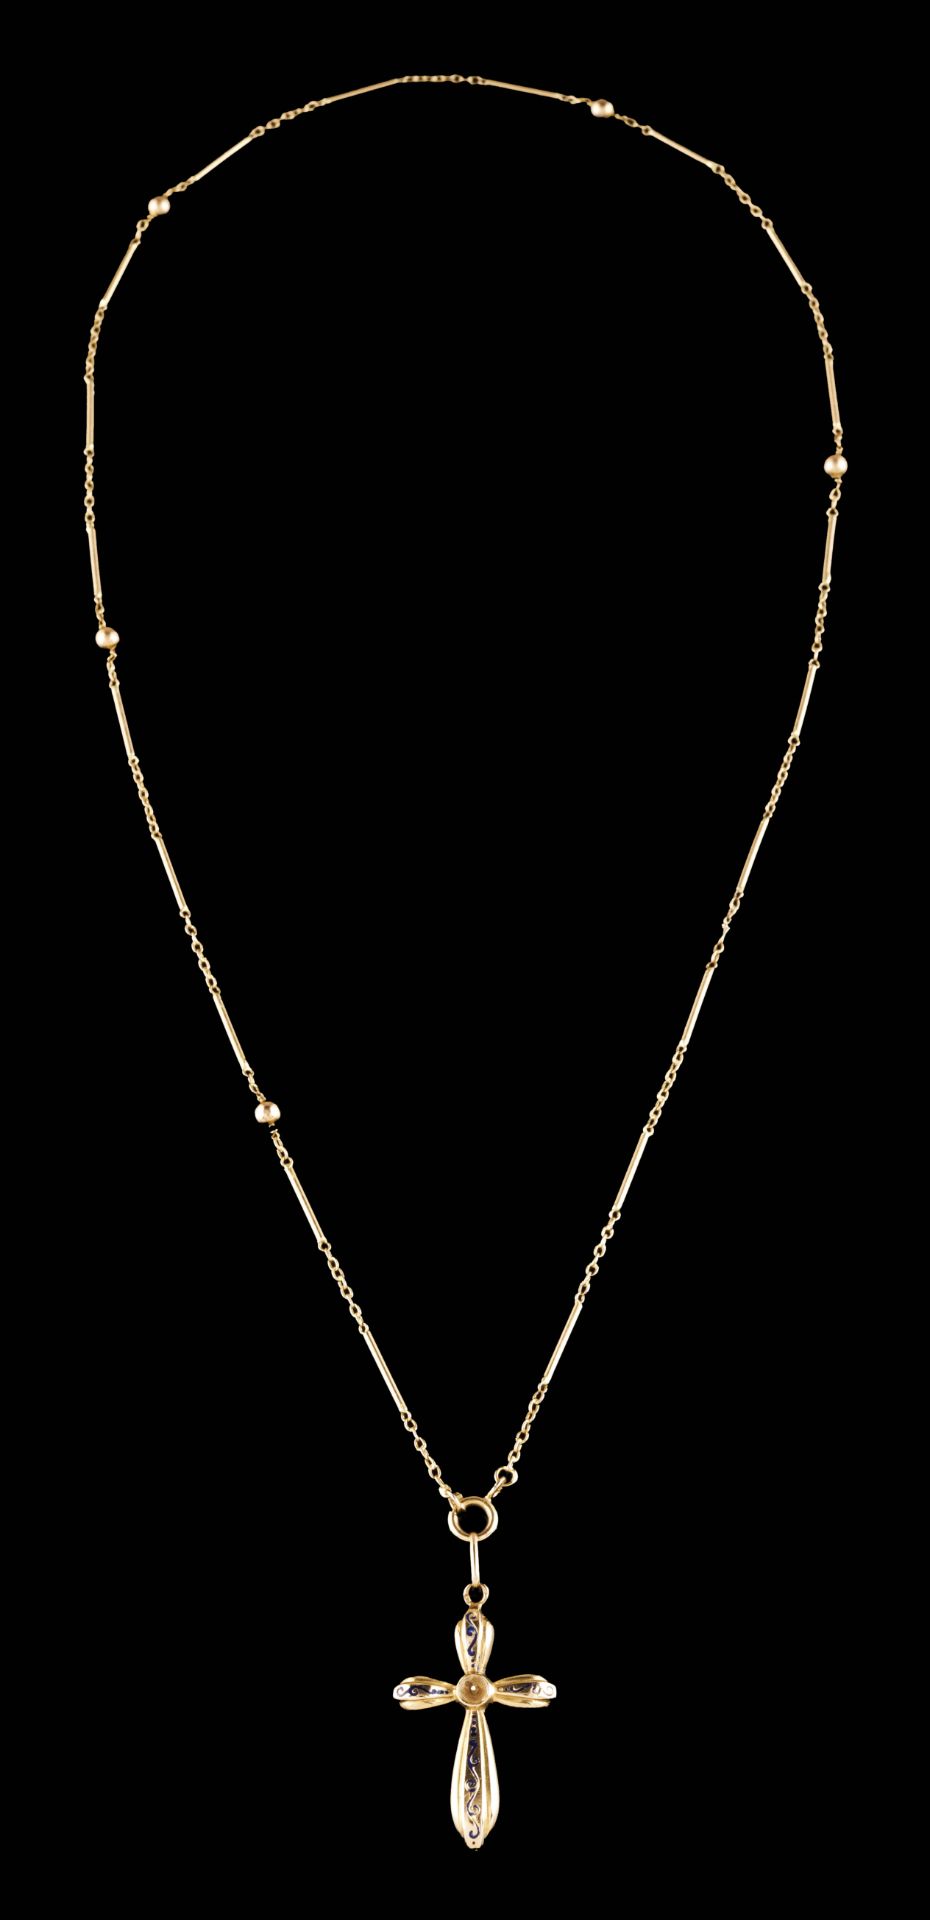 A chain with cross pendant